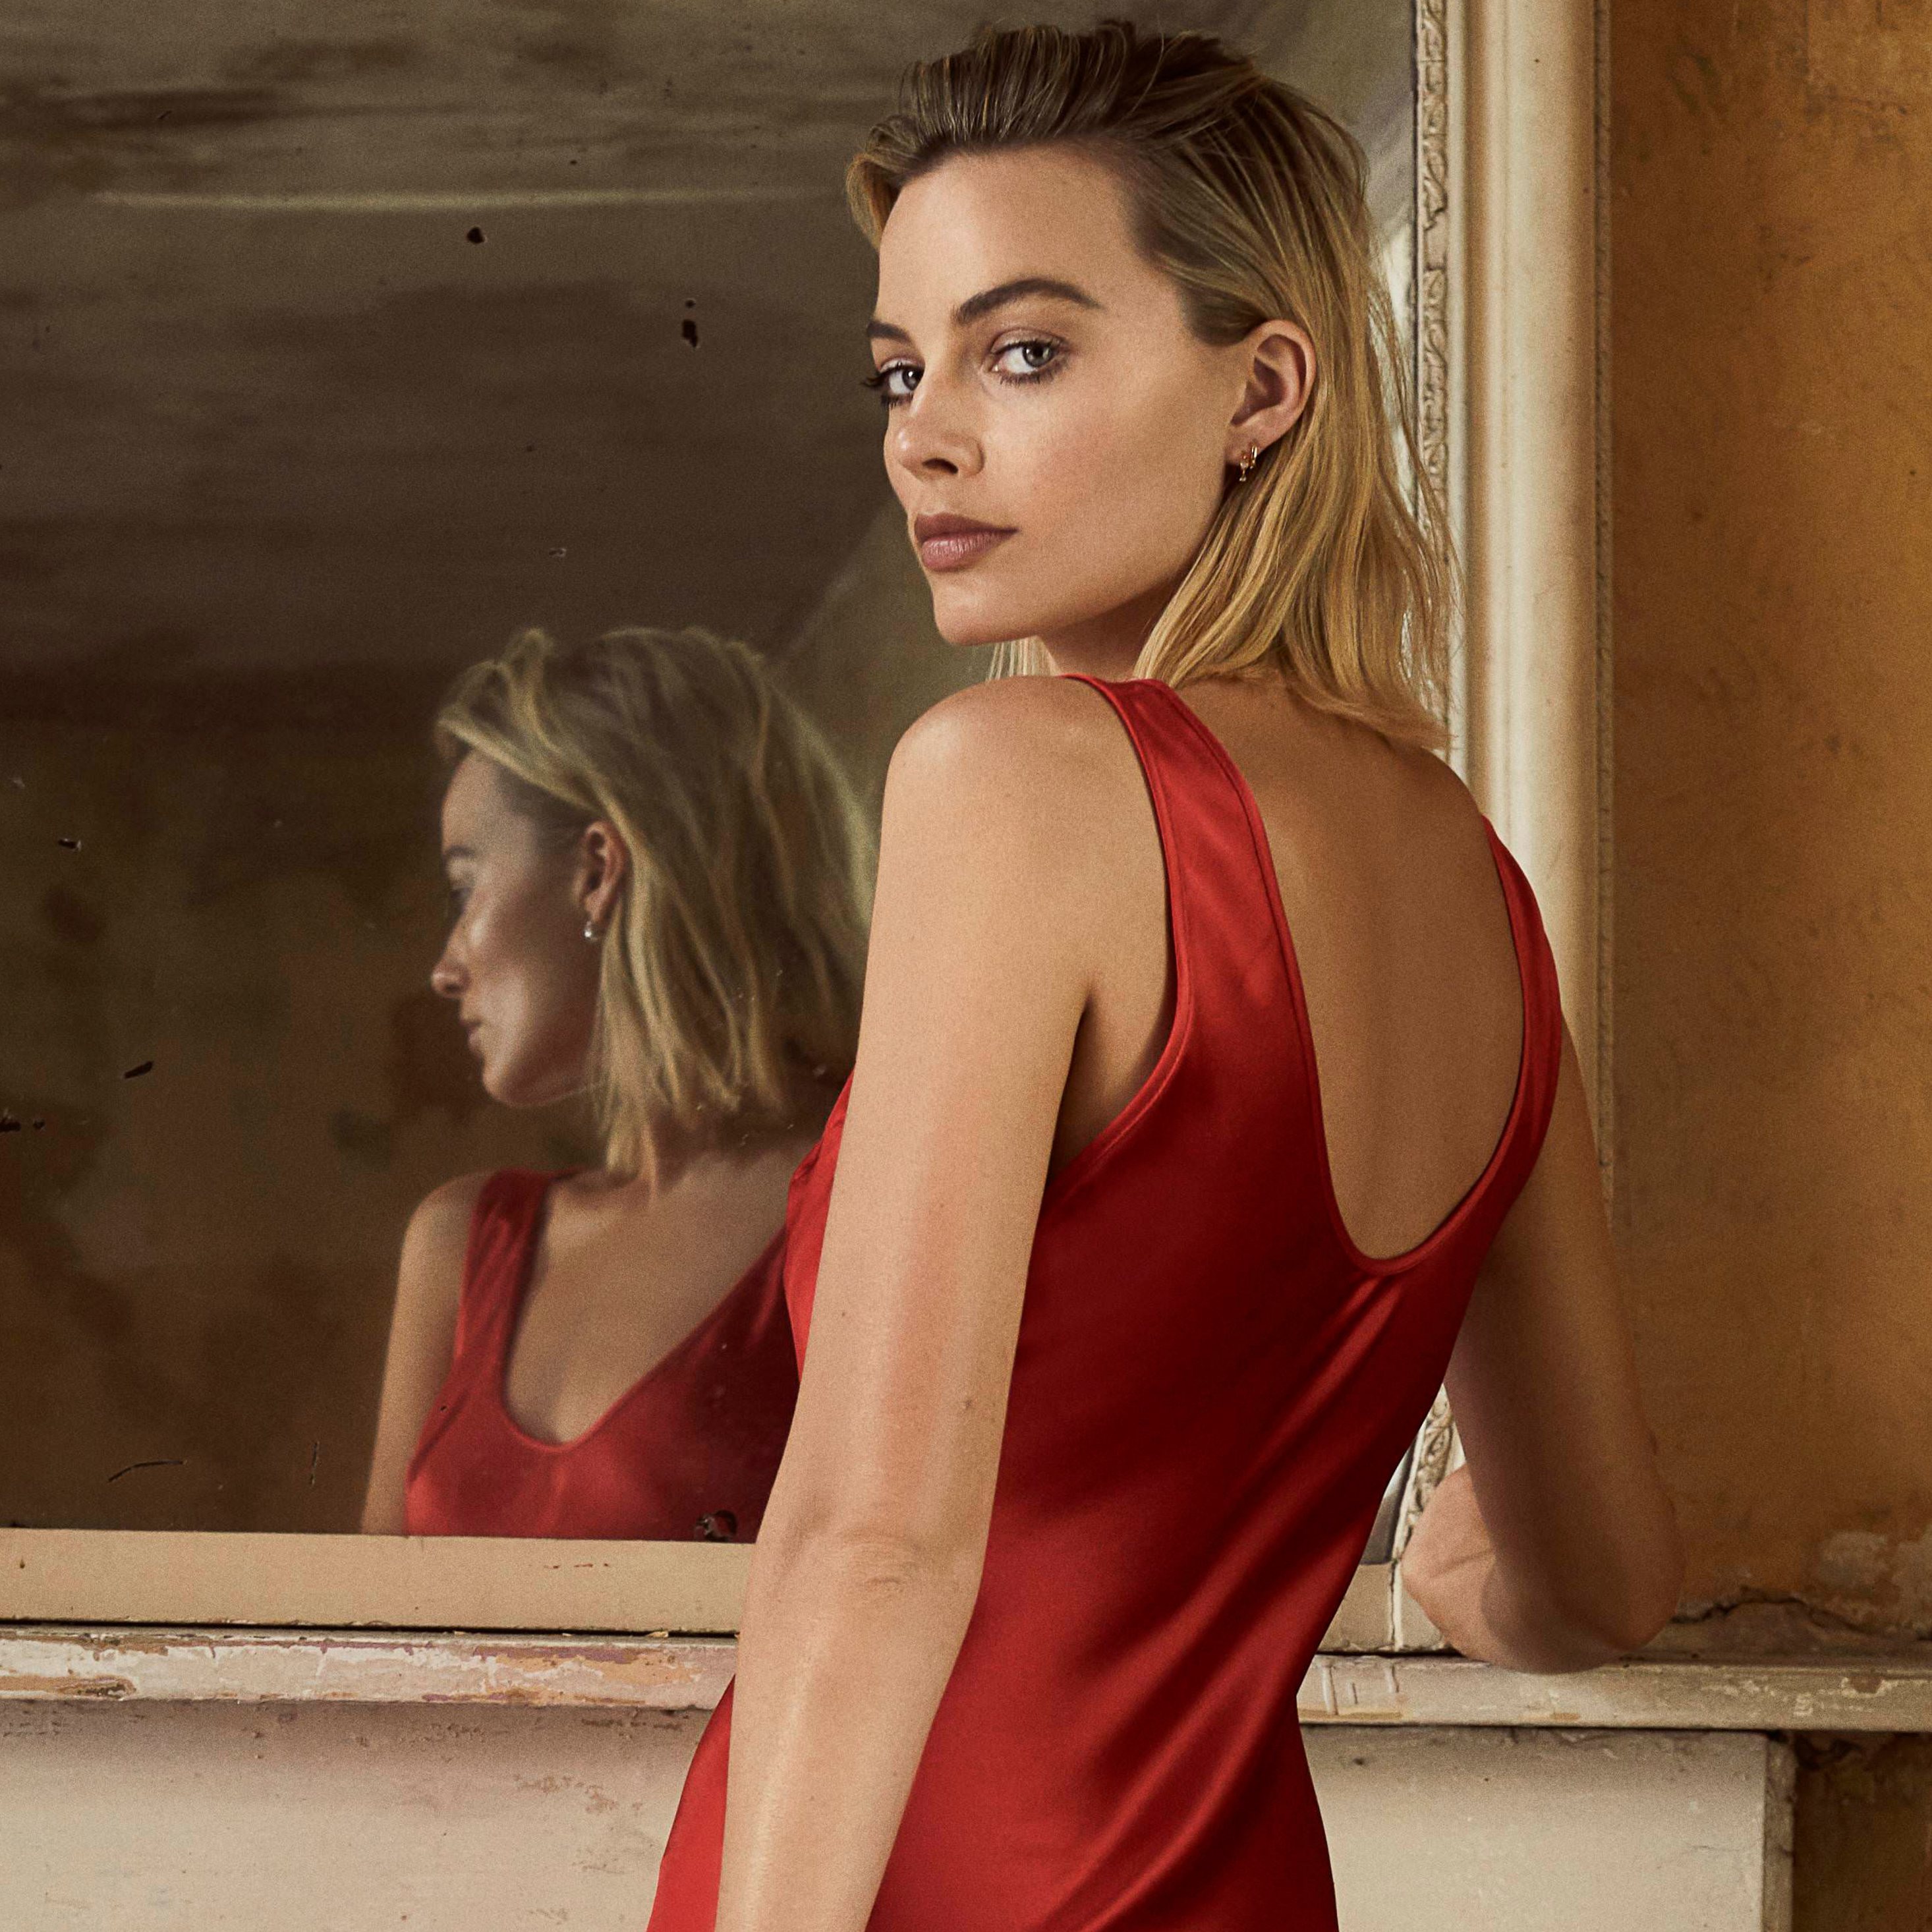 margot-robbie-in-red-dress-photoshoot-for-evening-standarad-7a.jpg